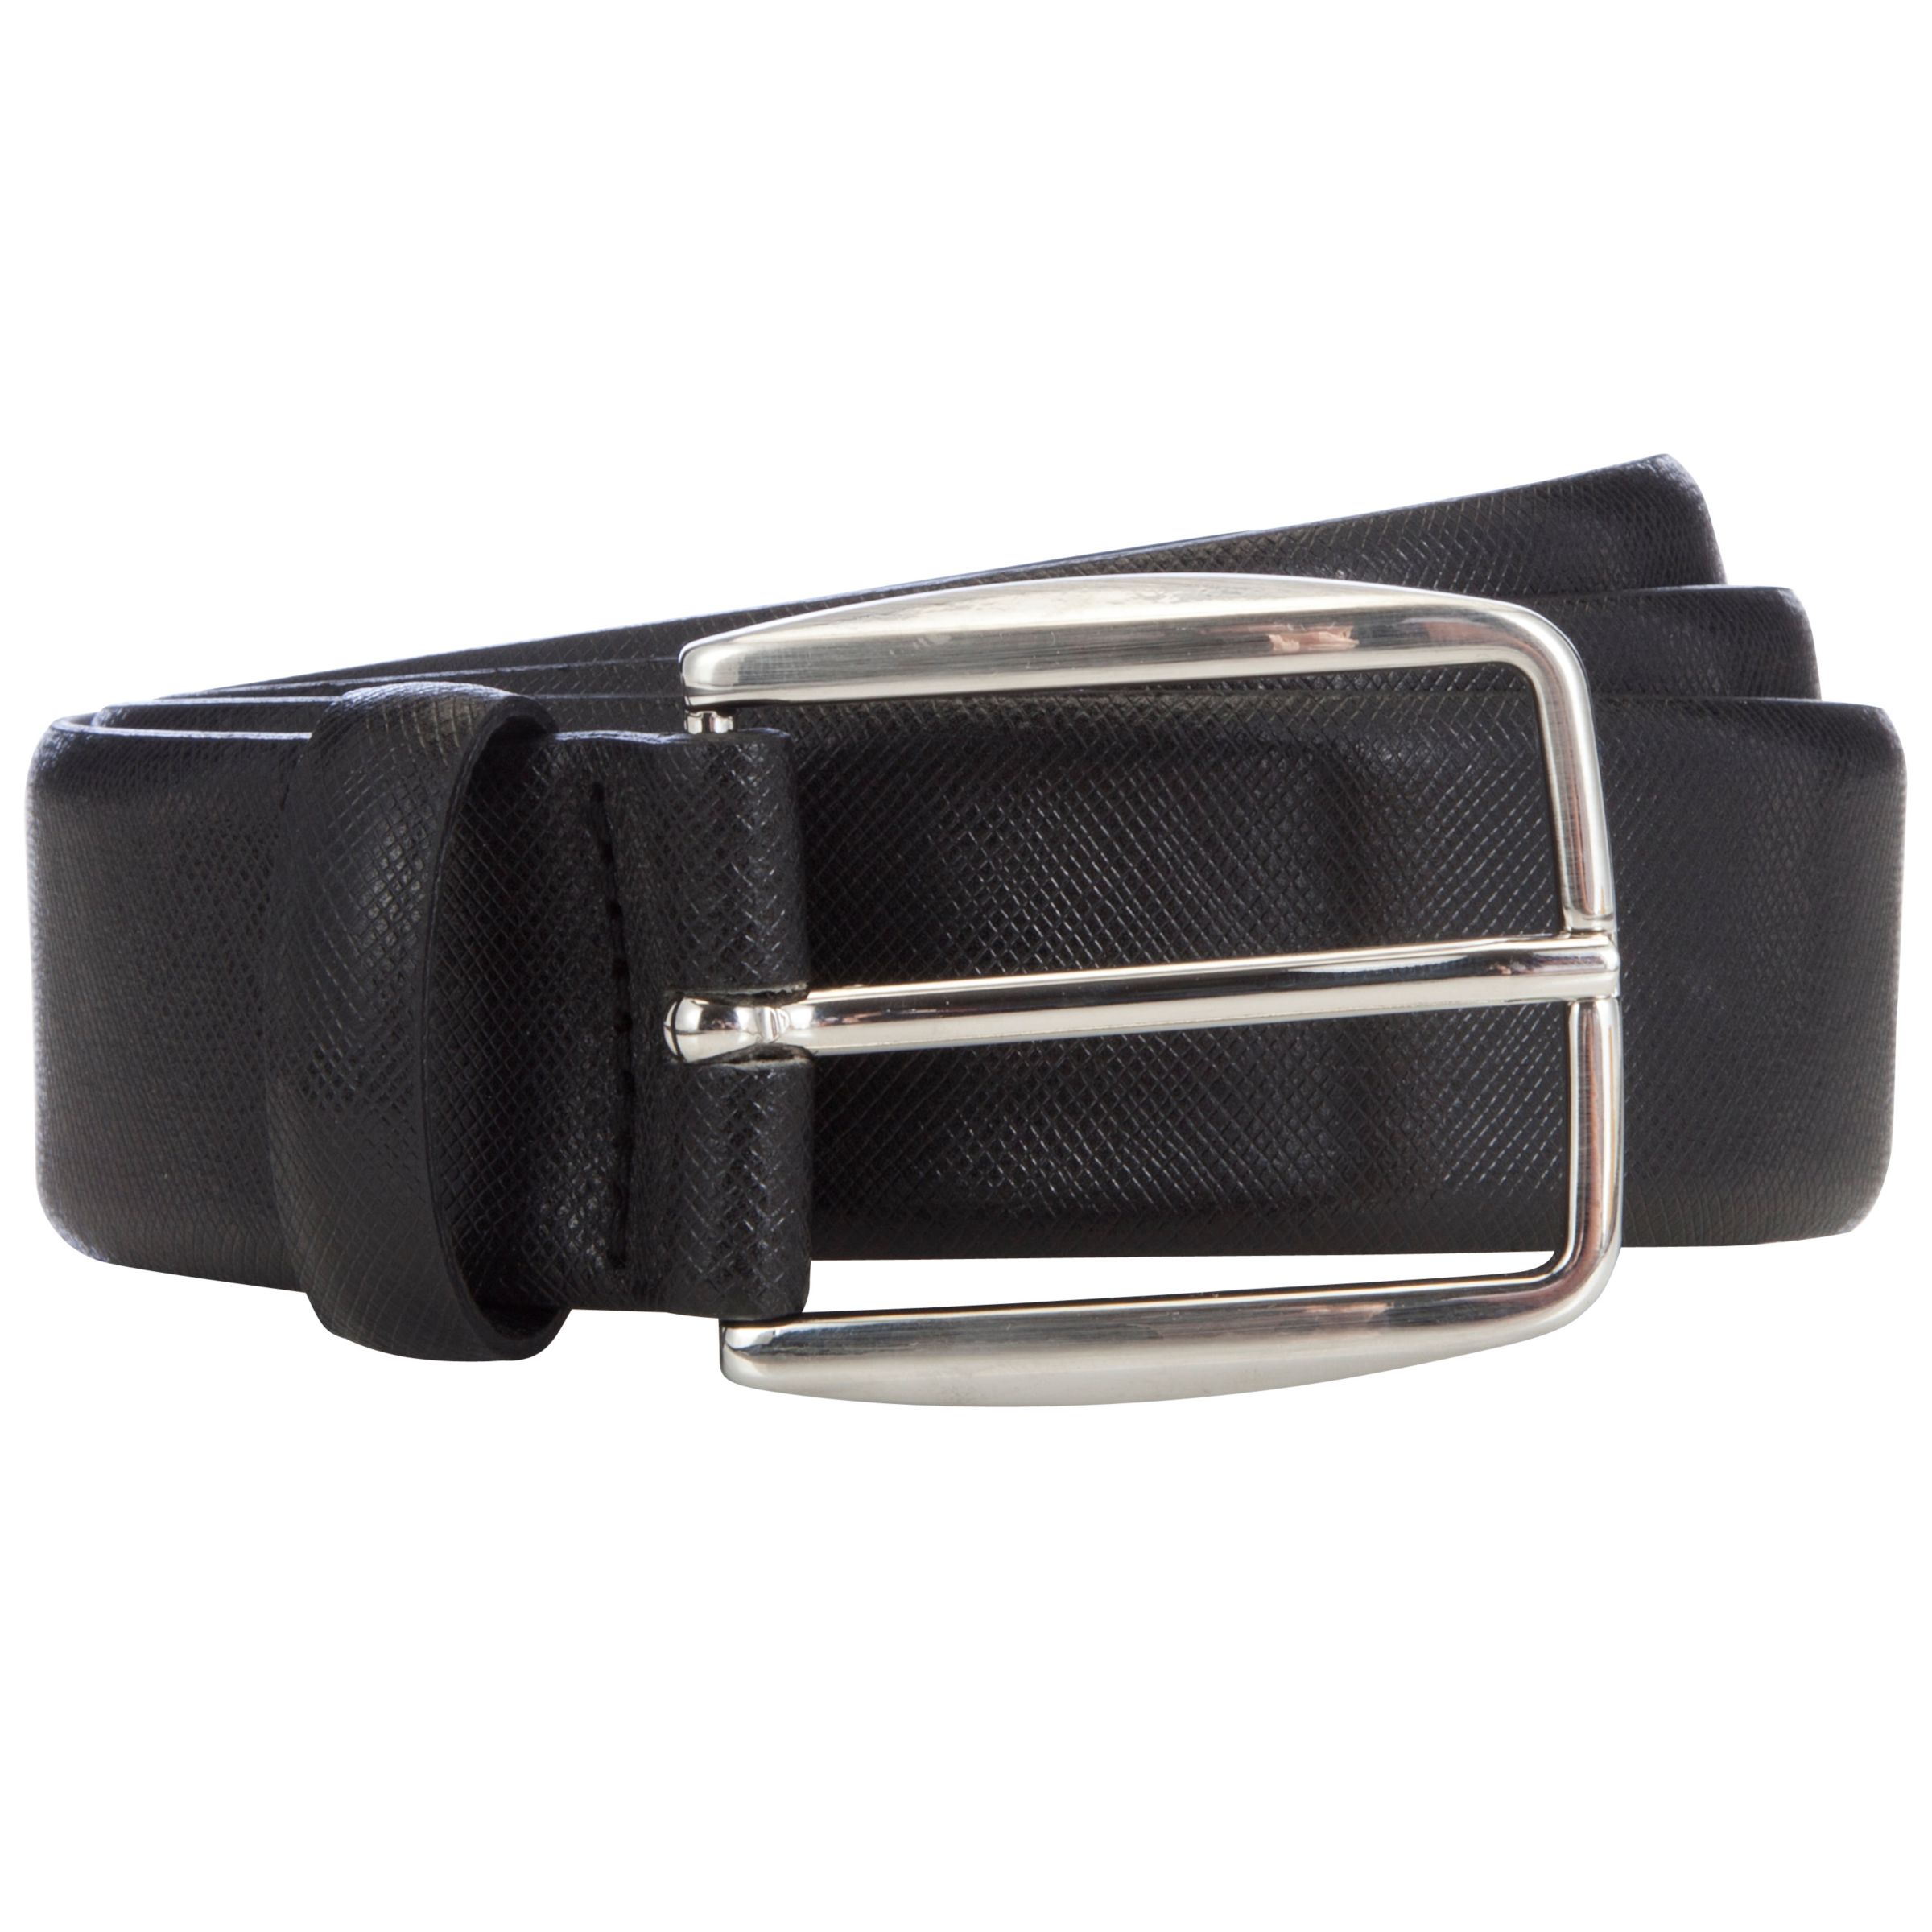 John Lewis & Partners Made in Italy Textured Leather Belt, Black, L